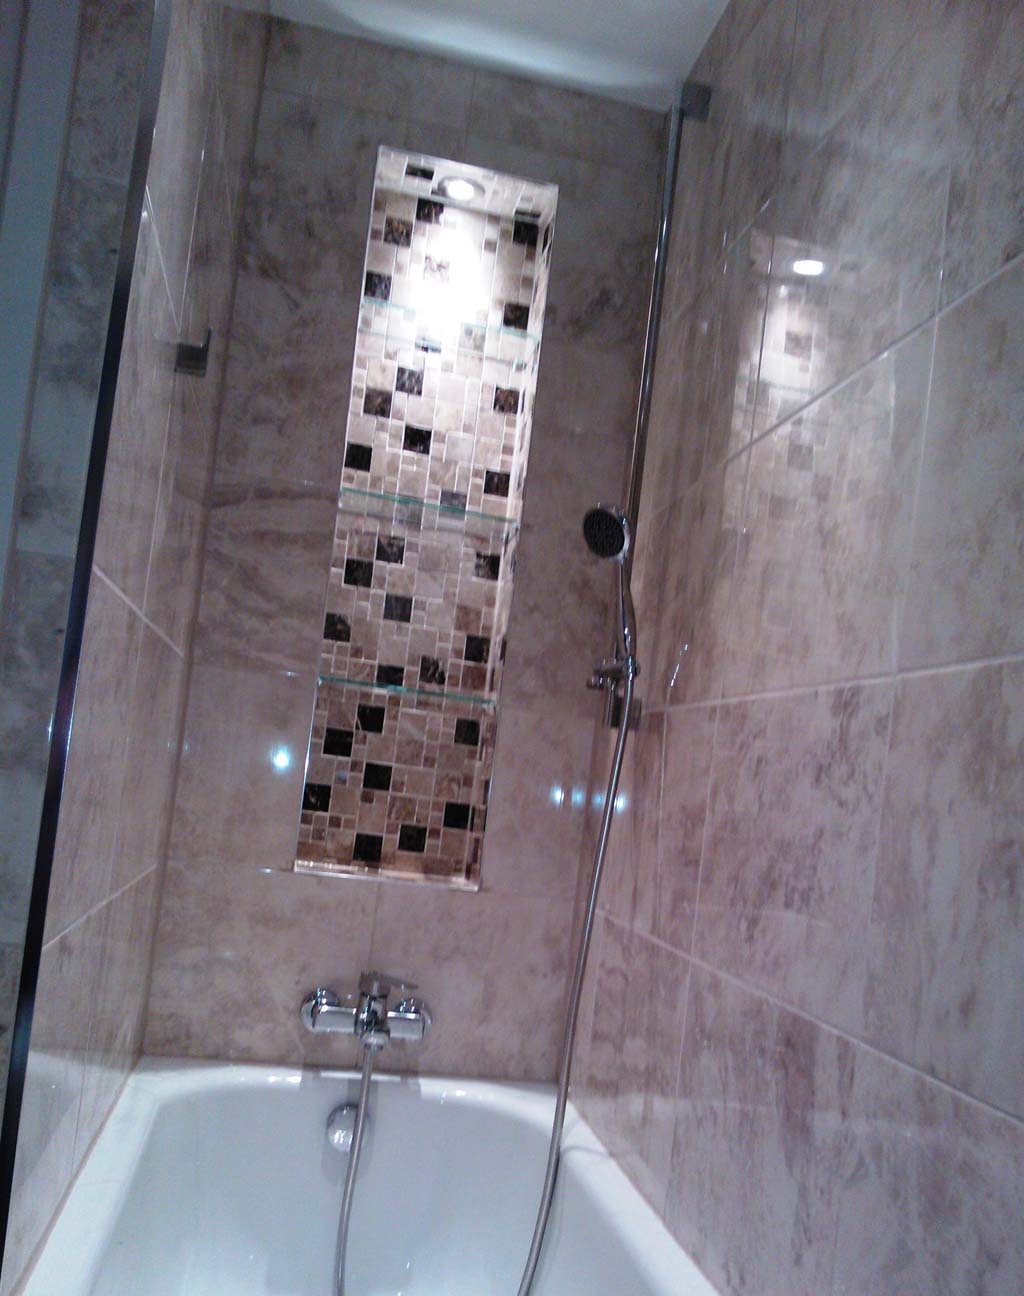 Bathroom Redecorating In Crouch End North London